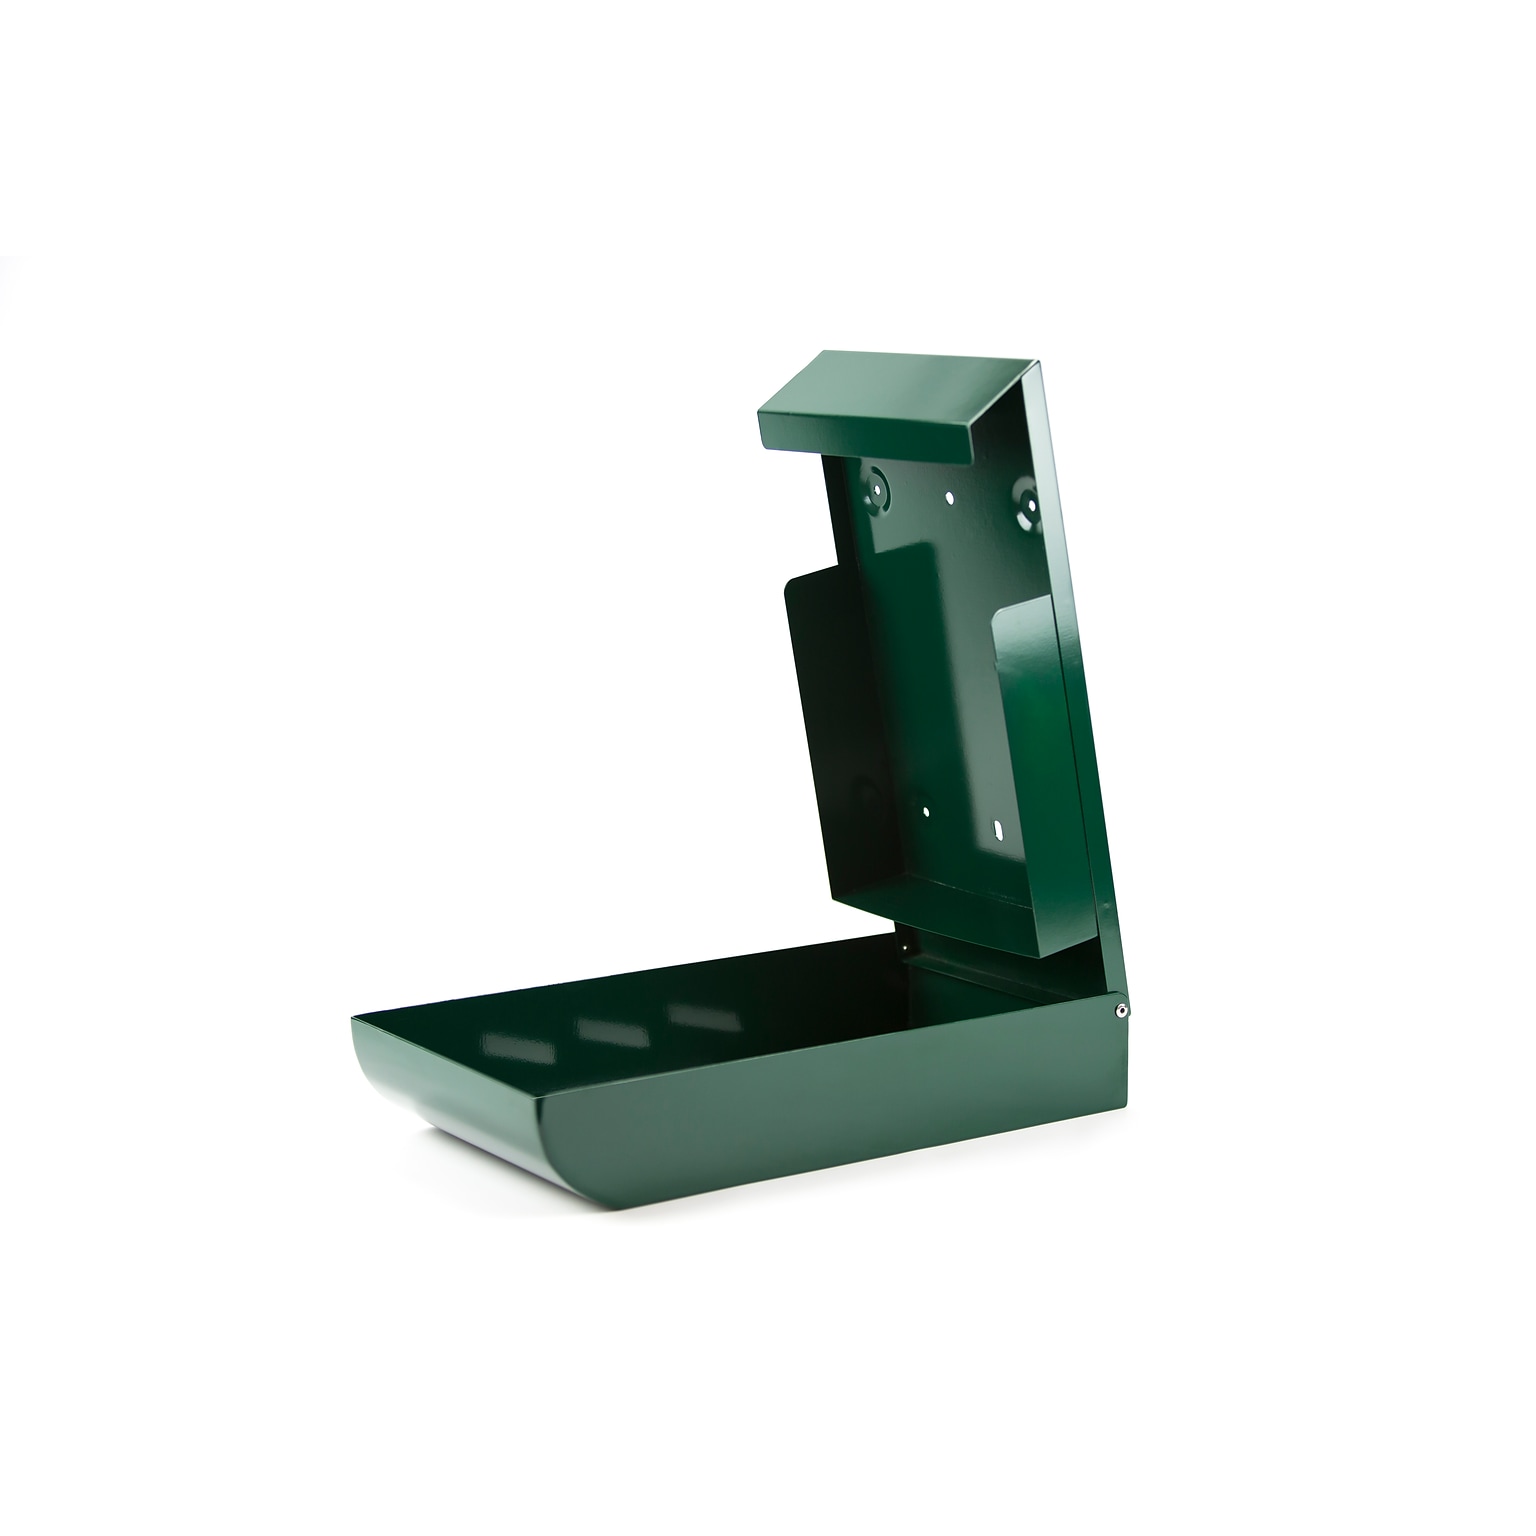 Poopy Pouch Monarch Pet Waste Bag Dispenser,Green, Steel, 600 Bag Capacity (PP-DSP-3R200)